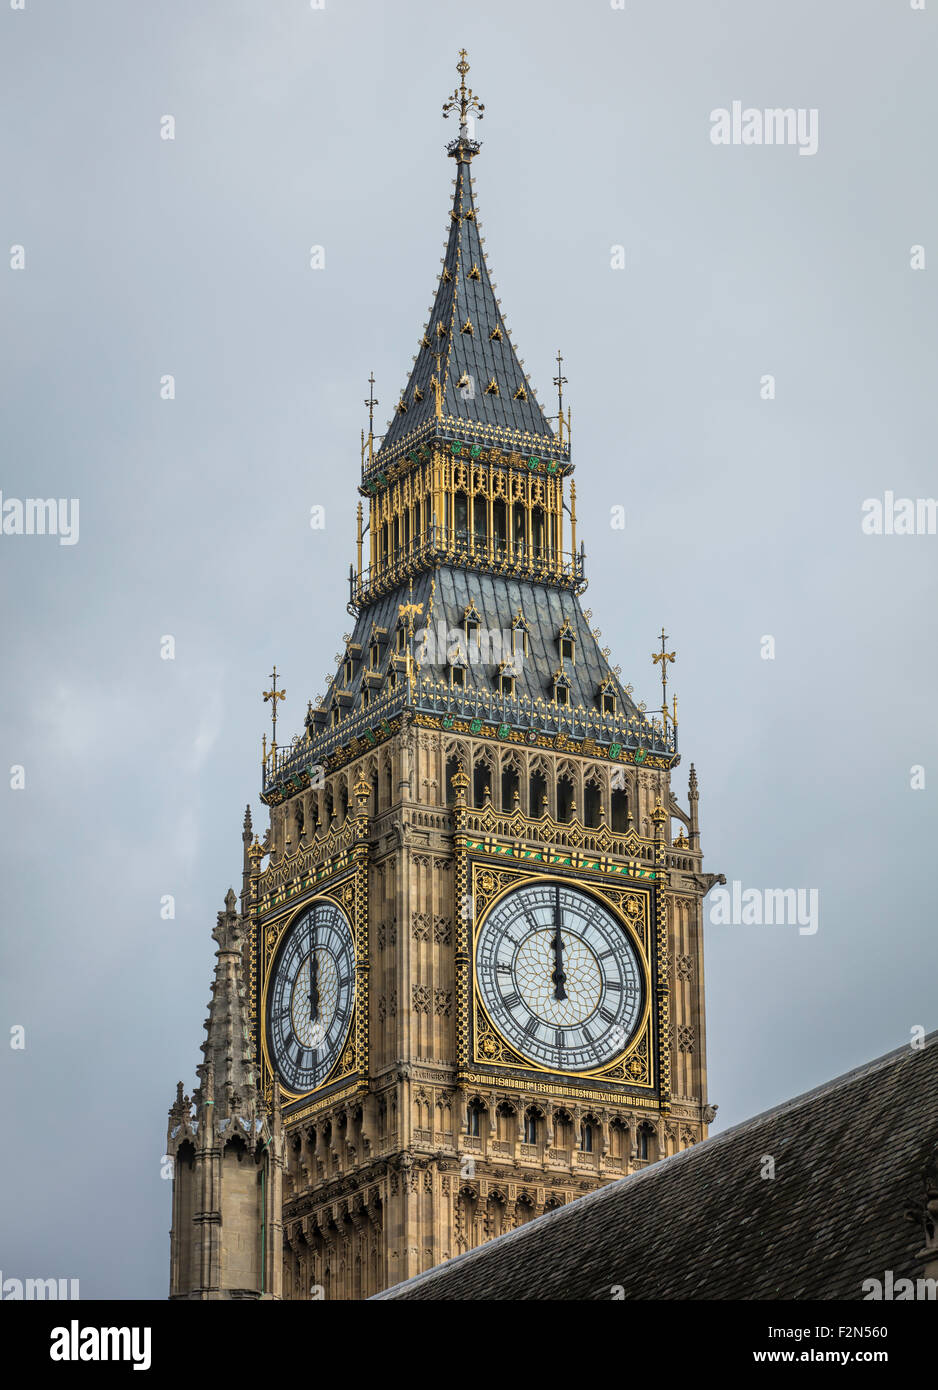 Two Faces Of The Clock Tower Of Big Ben At Westminster Striking 12 Stock Photo Alamy